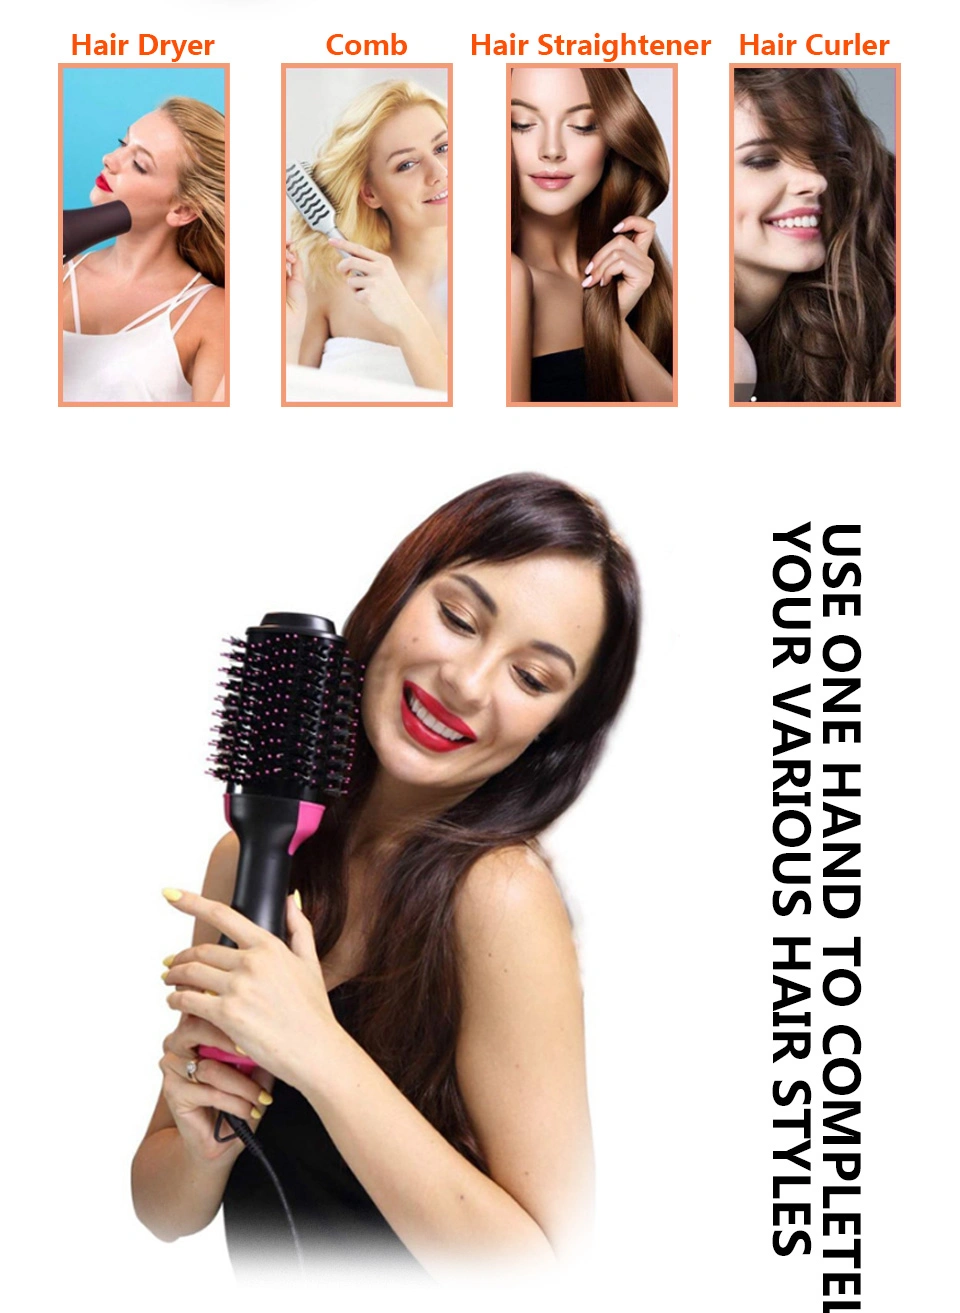 Hot Selling Hair Styler PRO Collection 3 In1 Multifunction One Step Hair Dryer Volumizer